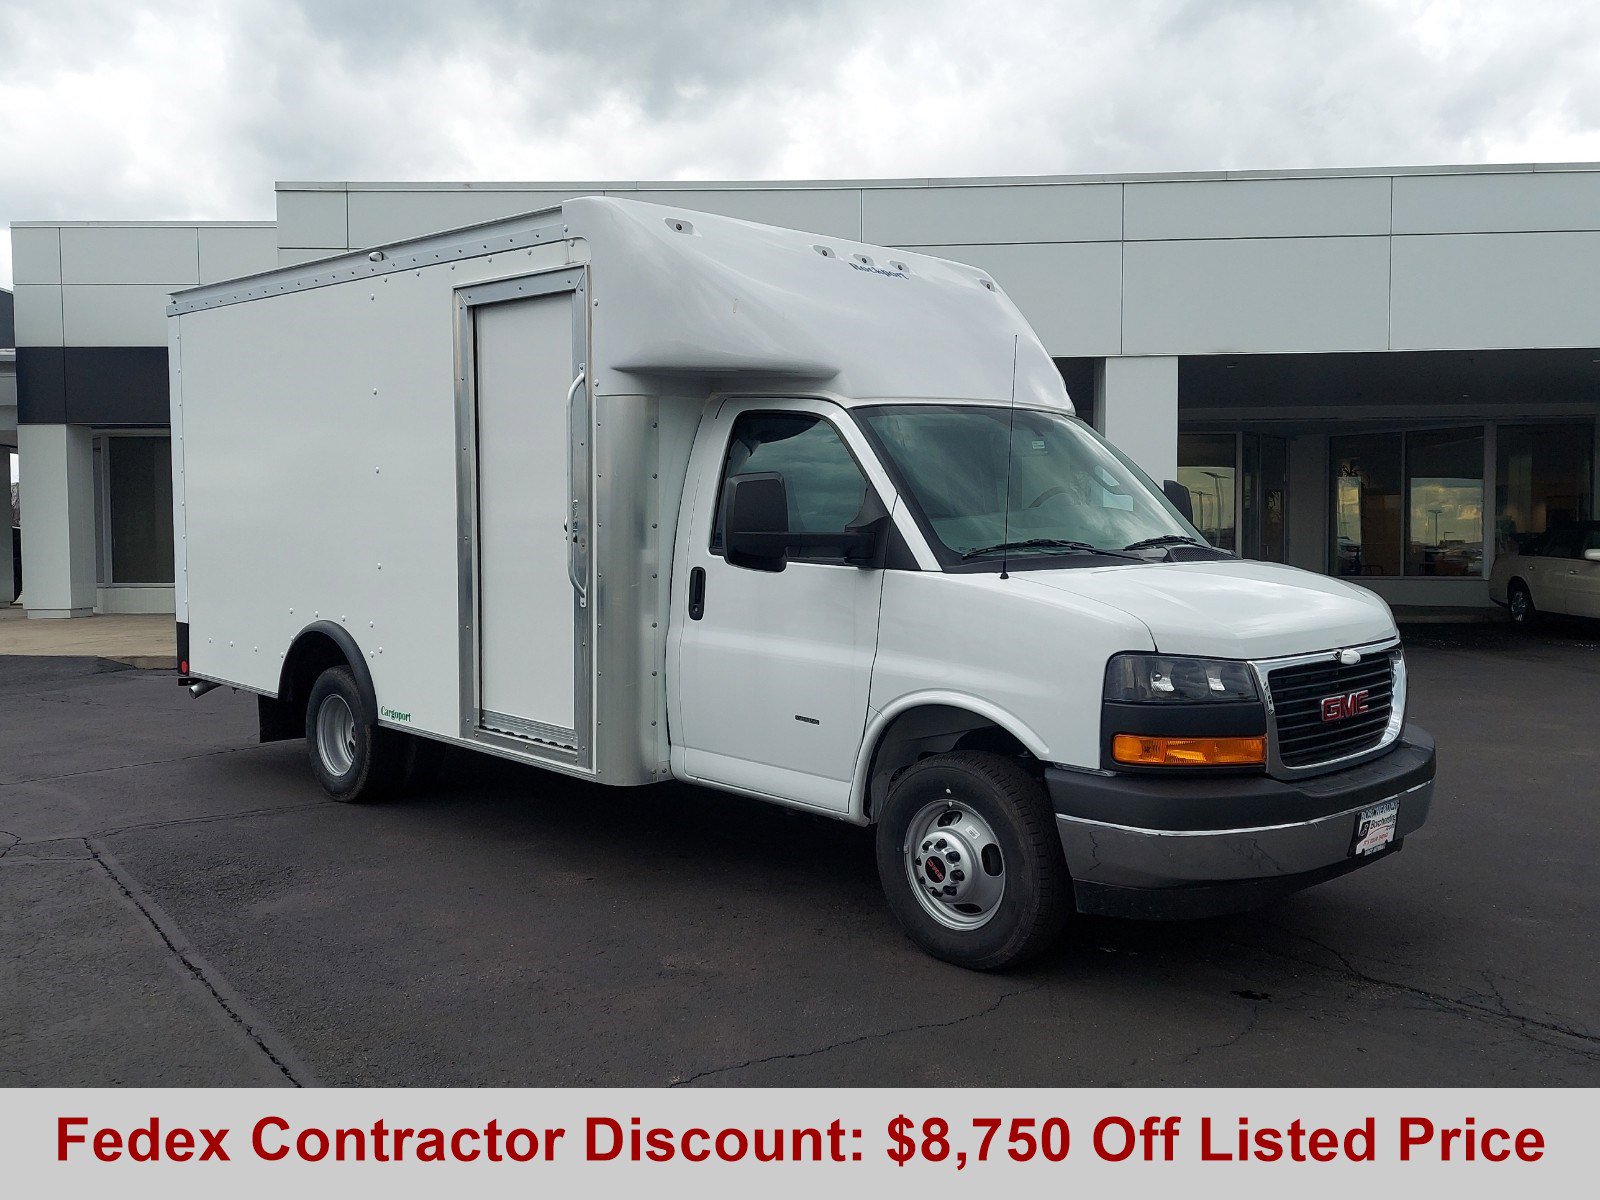 New 2022 GMC Savana 3500 for Sale Right Now - Autotrader